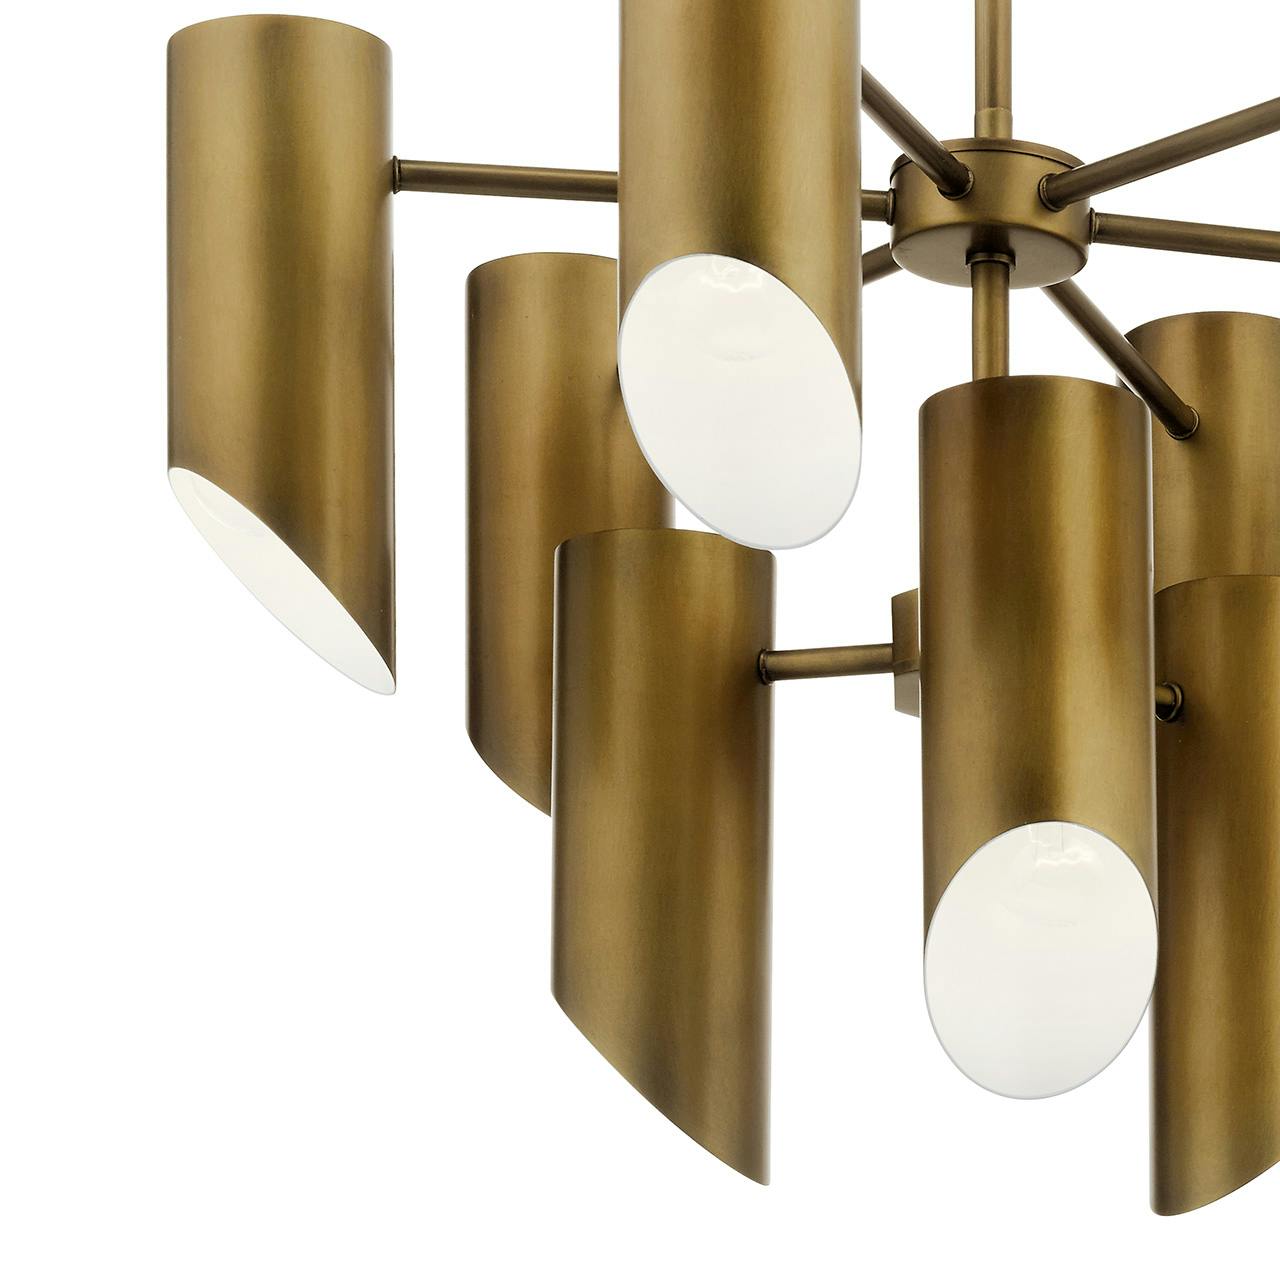 Close up view of the Trentino 9 Light Chandelier Natural Brass on a white background